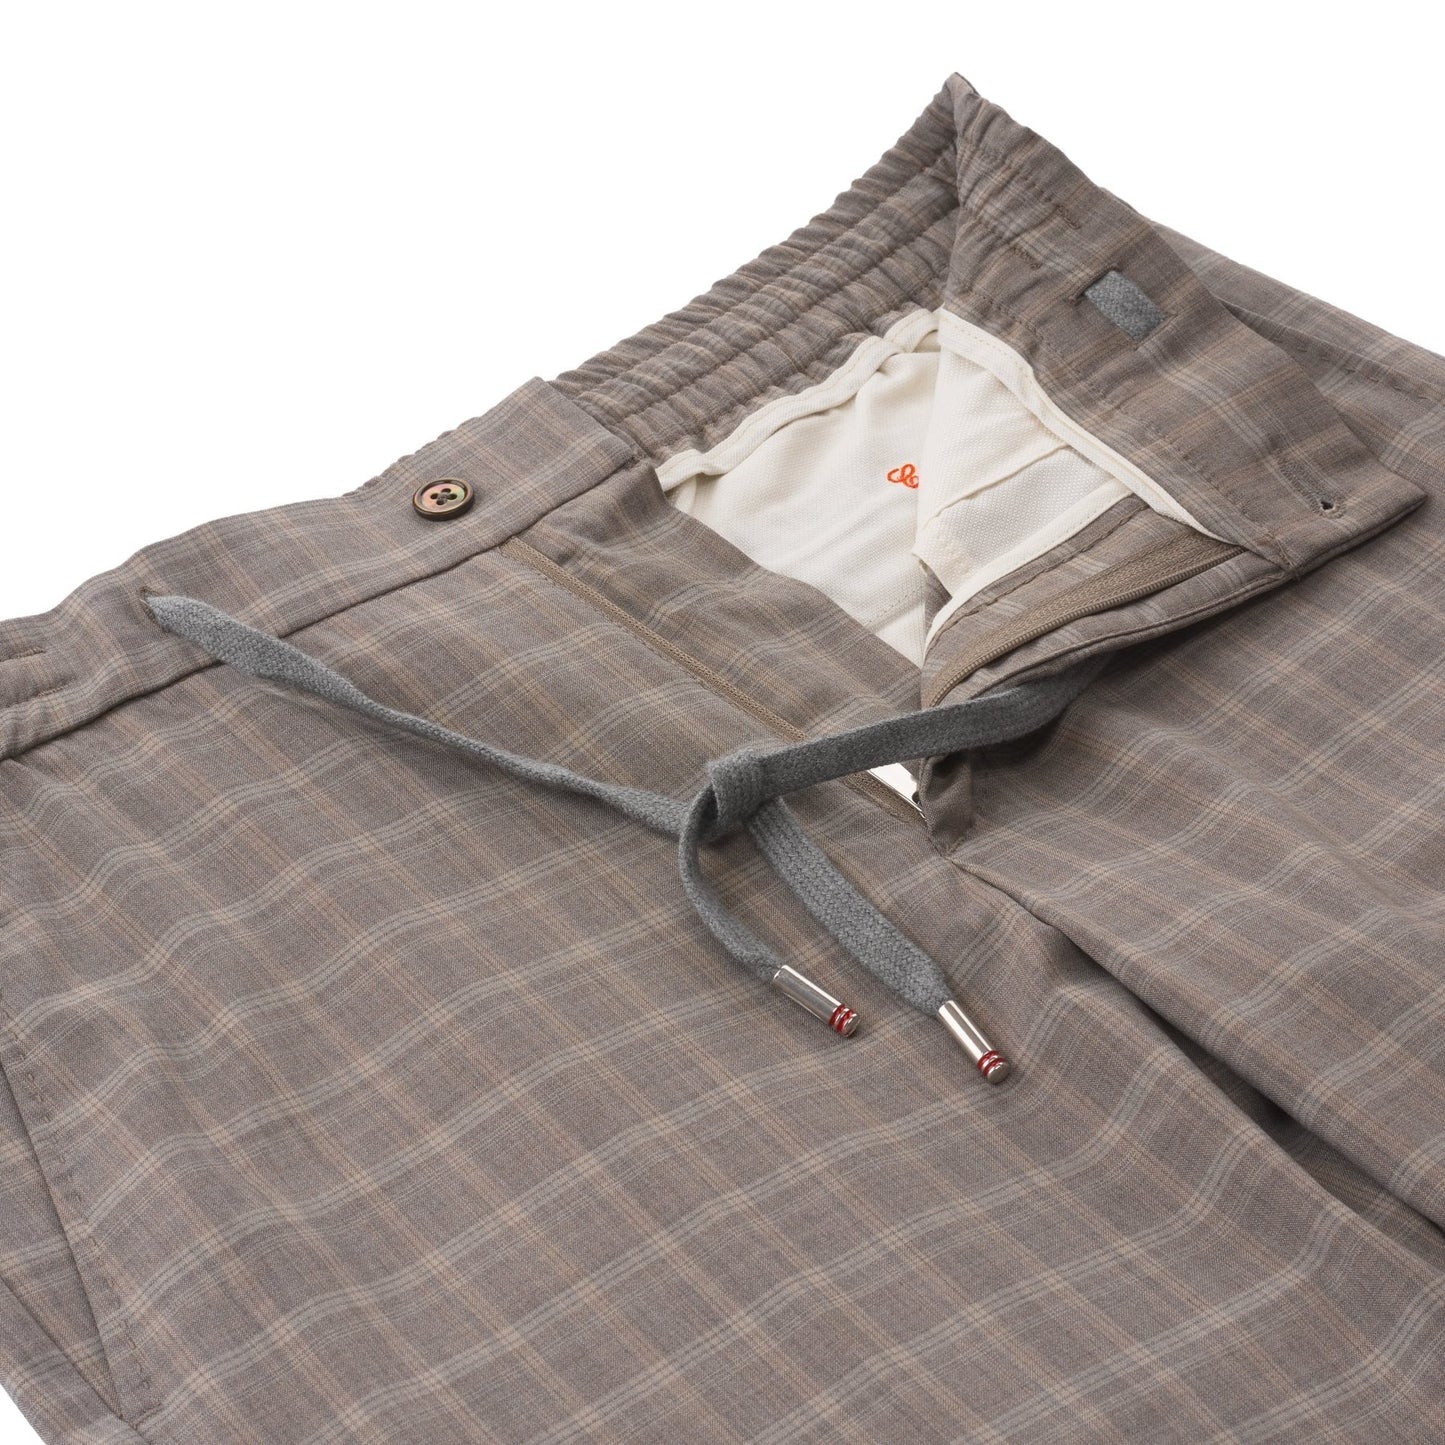 Marco Pescarolo Slim-Fit Virgin Wool Checked Drawstring Trousers in Light Brown - SARTALE